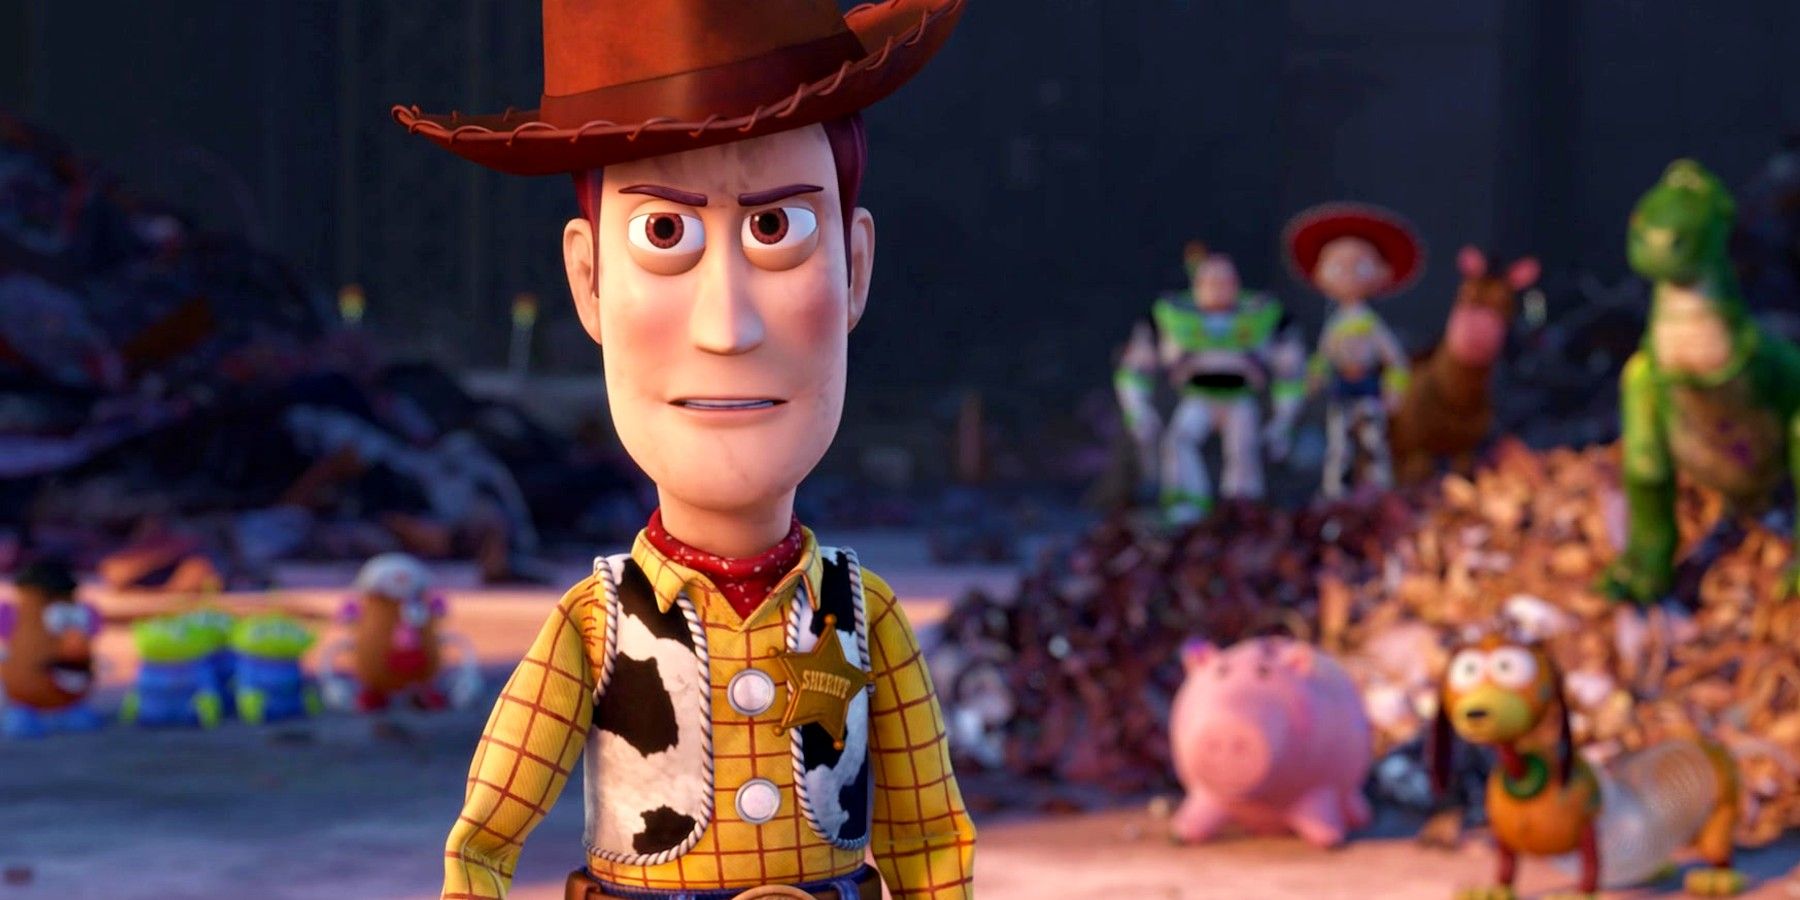 Toy Story 5: Will Woody and Buzz return for another big screen adventure?